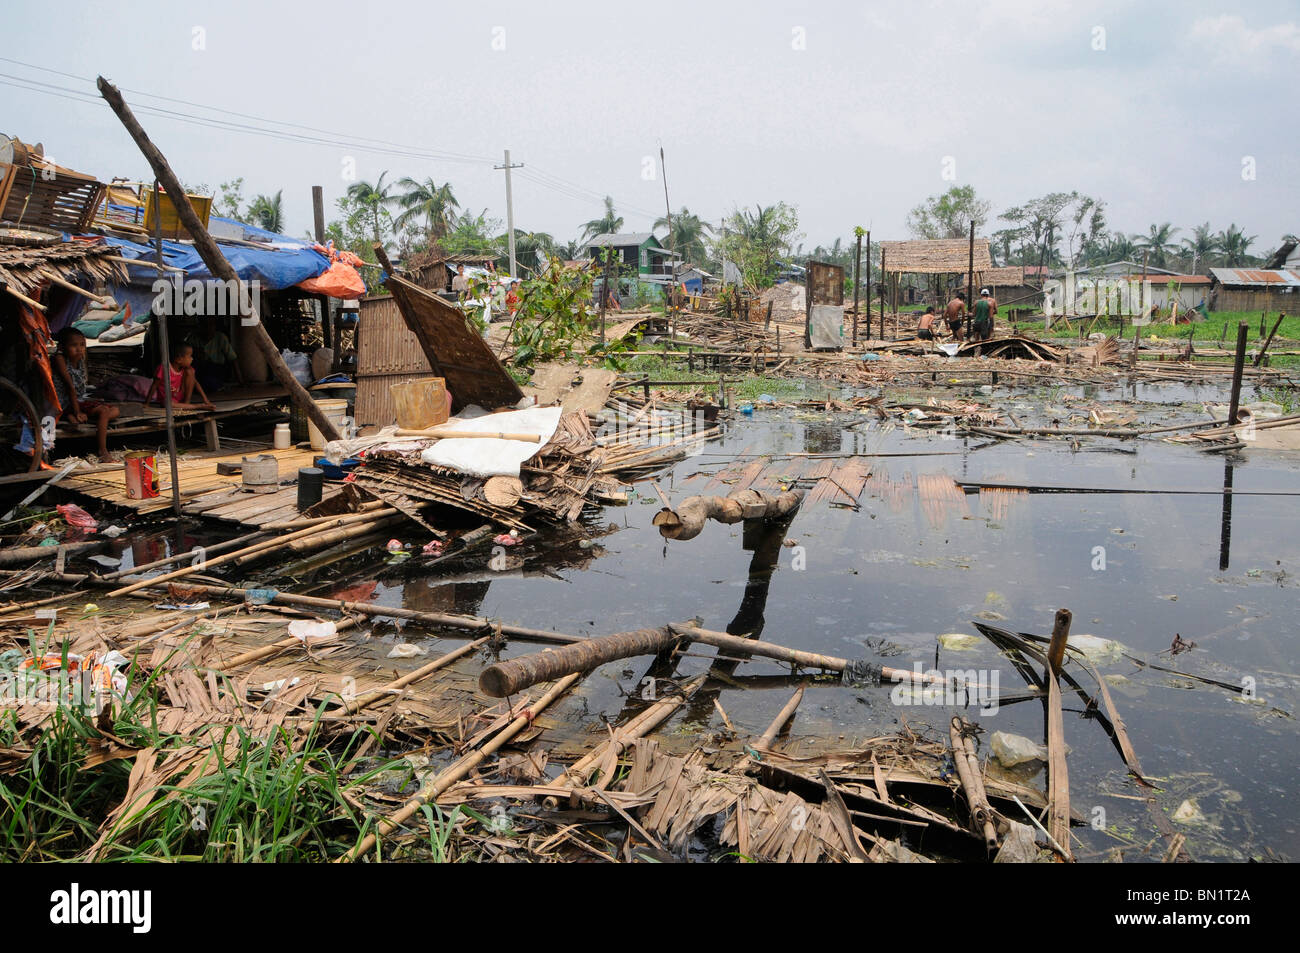 A flooded area in Hlaing Tharyar township of Yangon after cyclone Nargis hit Myanmar on May 2008 Stock Photo